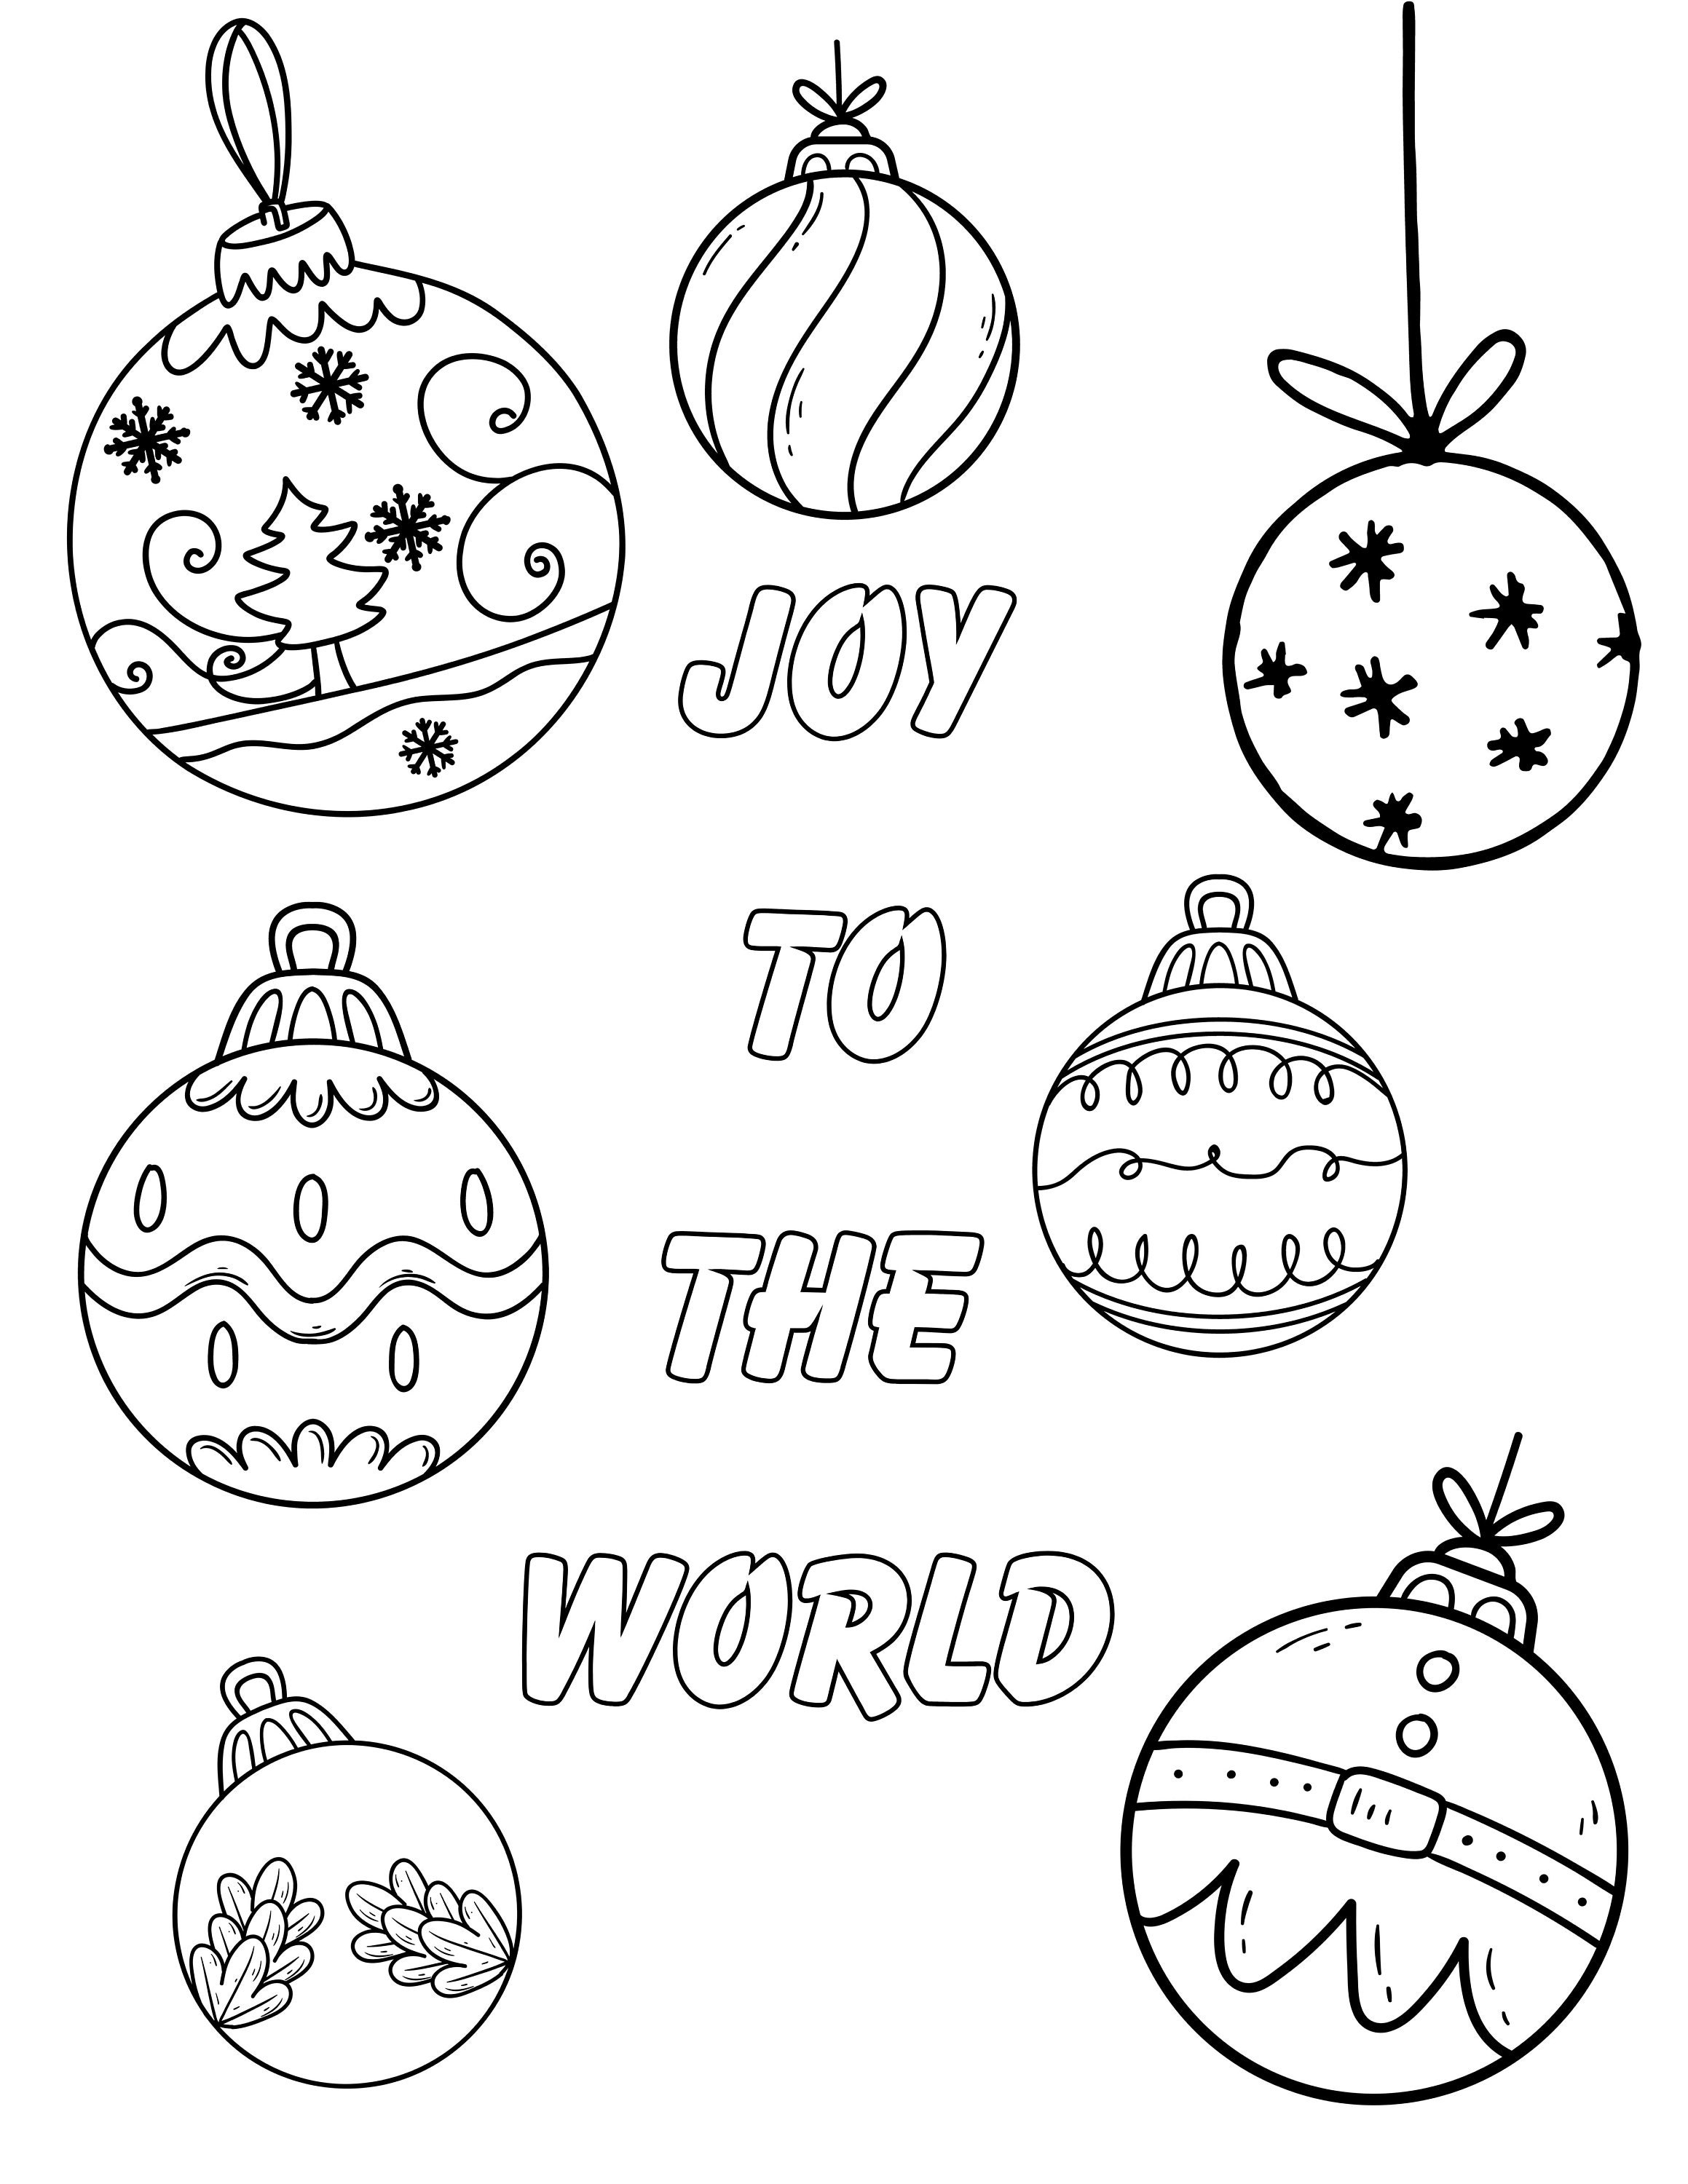 Christmas Coloring Pages Five Printable Coloring Pages Kids Christmas ...